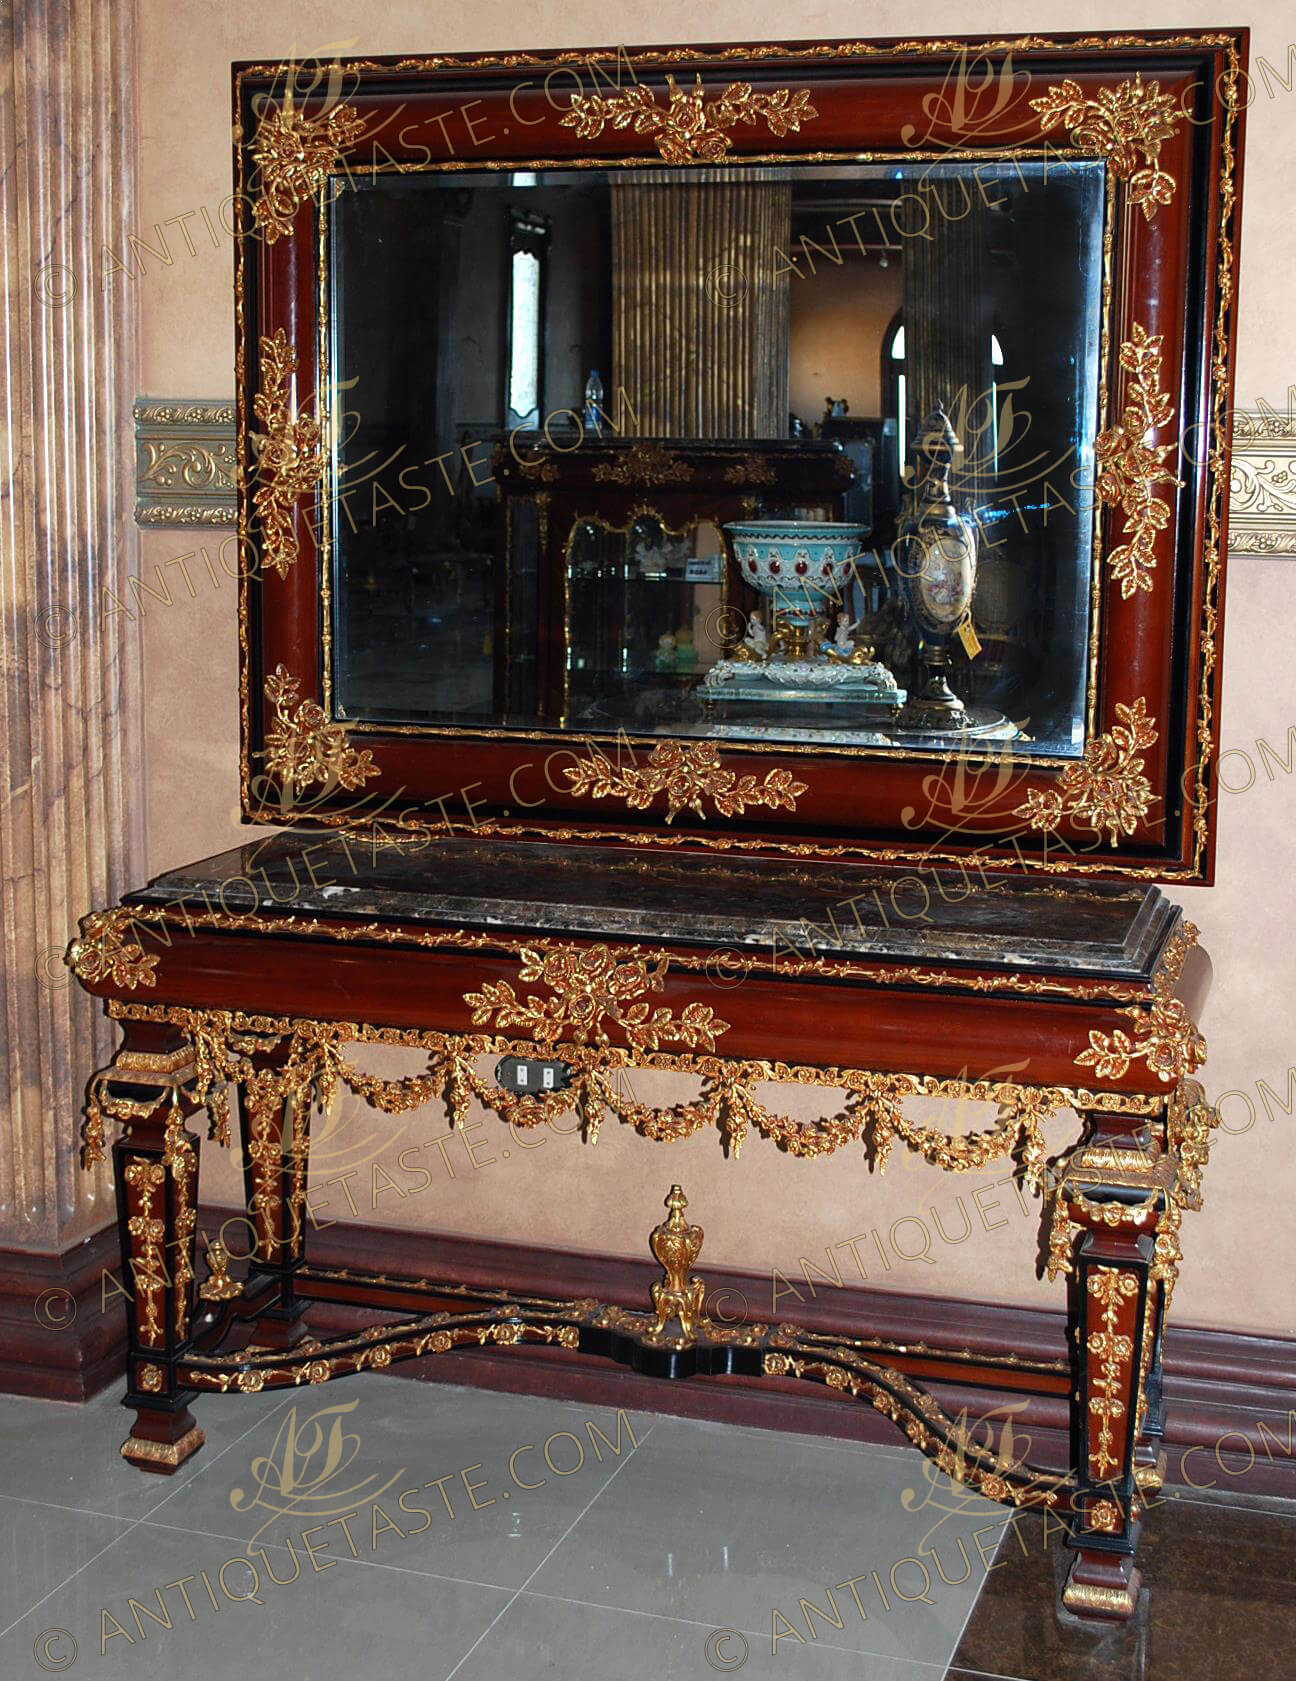 A stately and imposing Louis XIV Neoclassical style gilt-ormolu-mounted mahogany finish console table with a matching mirror, full of ormolu garlands, swags, strap-works, scrolled leaf motifs, trellis, pierced works. The console with wrap around ormolu sabots and top ormolu foliate mount joined by an ormolu filet. The ormolu filet continues all around the contours of the mirror and the table. The mirror frame is ornamented with ormolu flower bouquets with leafy branches. The molded beveled  marble top console table raised on robust square tapered legs, with a convex apron ornamented with gilt leafy ormolu works of flower bouquets and branches. The legs and the frieze are ornamented with ormolu pendant swags and connected with curvy X stretcher garnished with flower garlands. The underneath sides and center are adorned with ormolu urn of prosperity